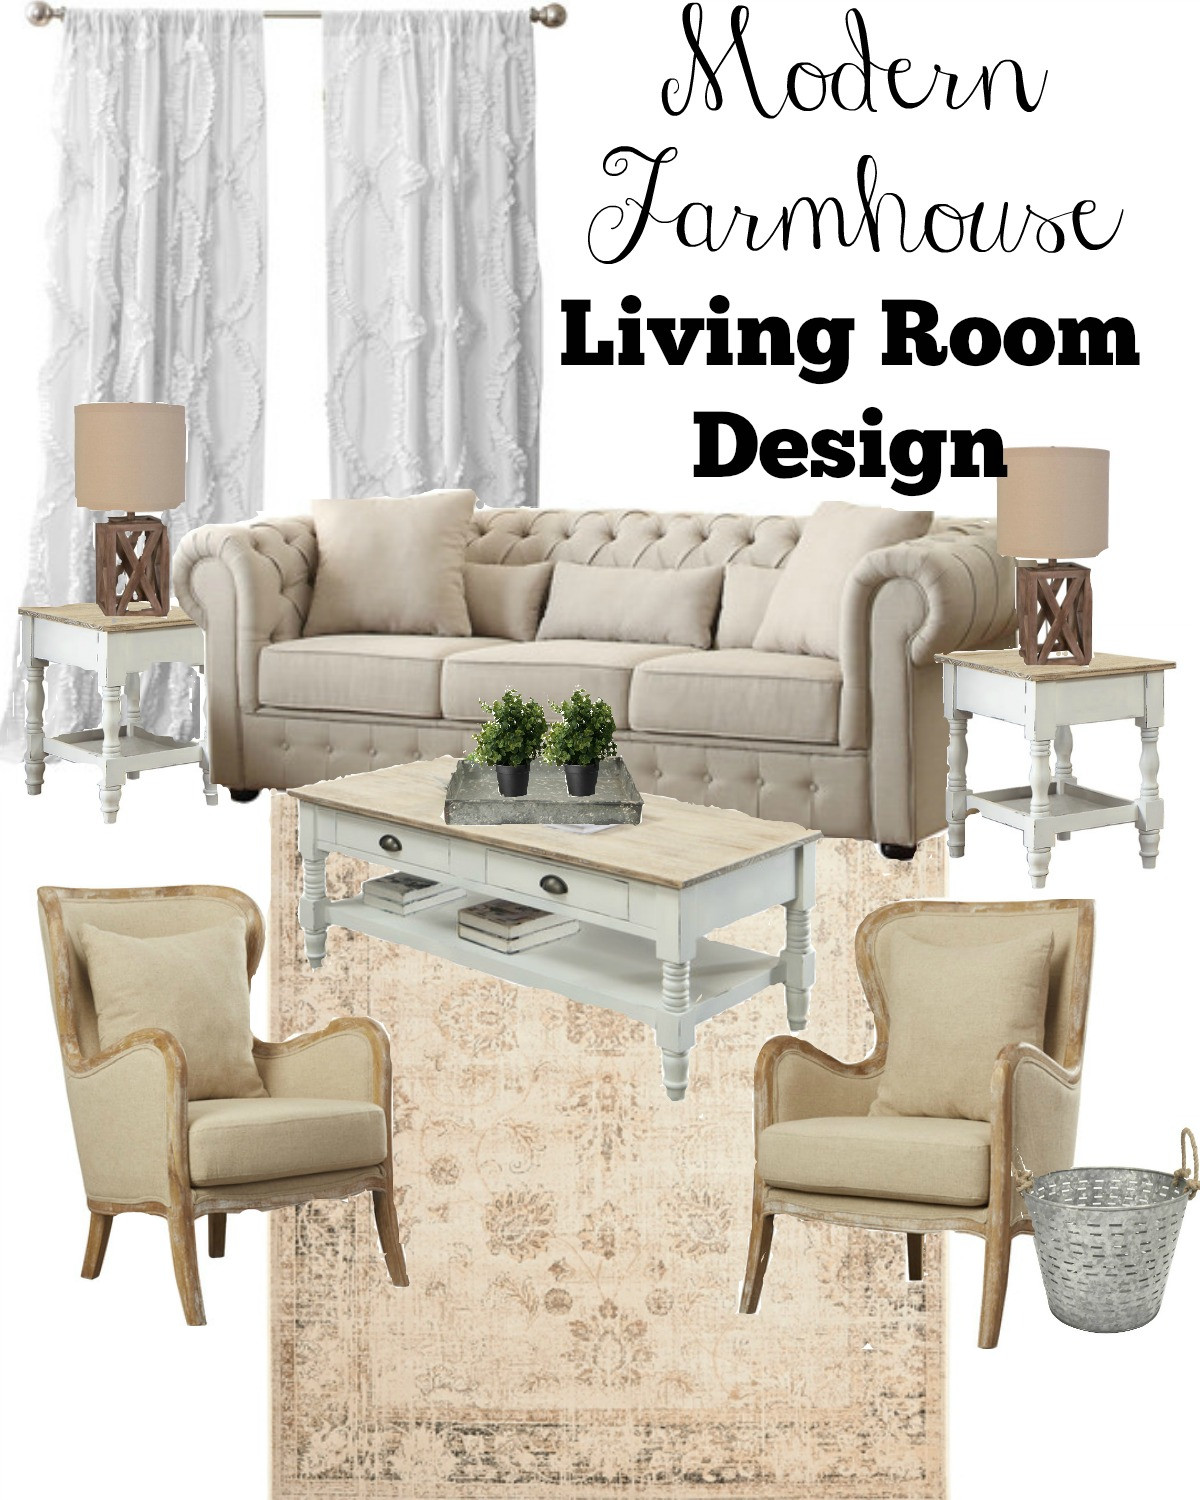 Farmhouse Living Room Furniture
 3 Key Tips for a Farmhouse Style Living Room